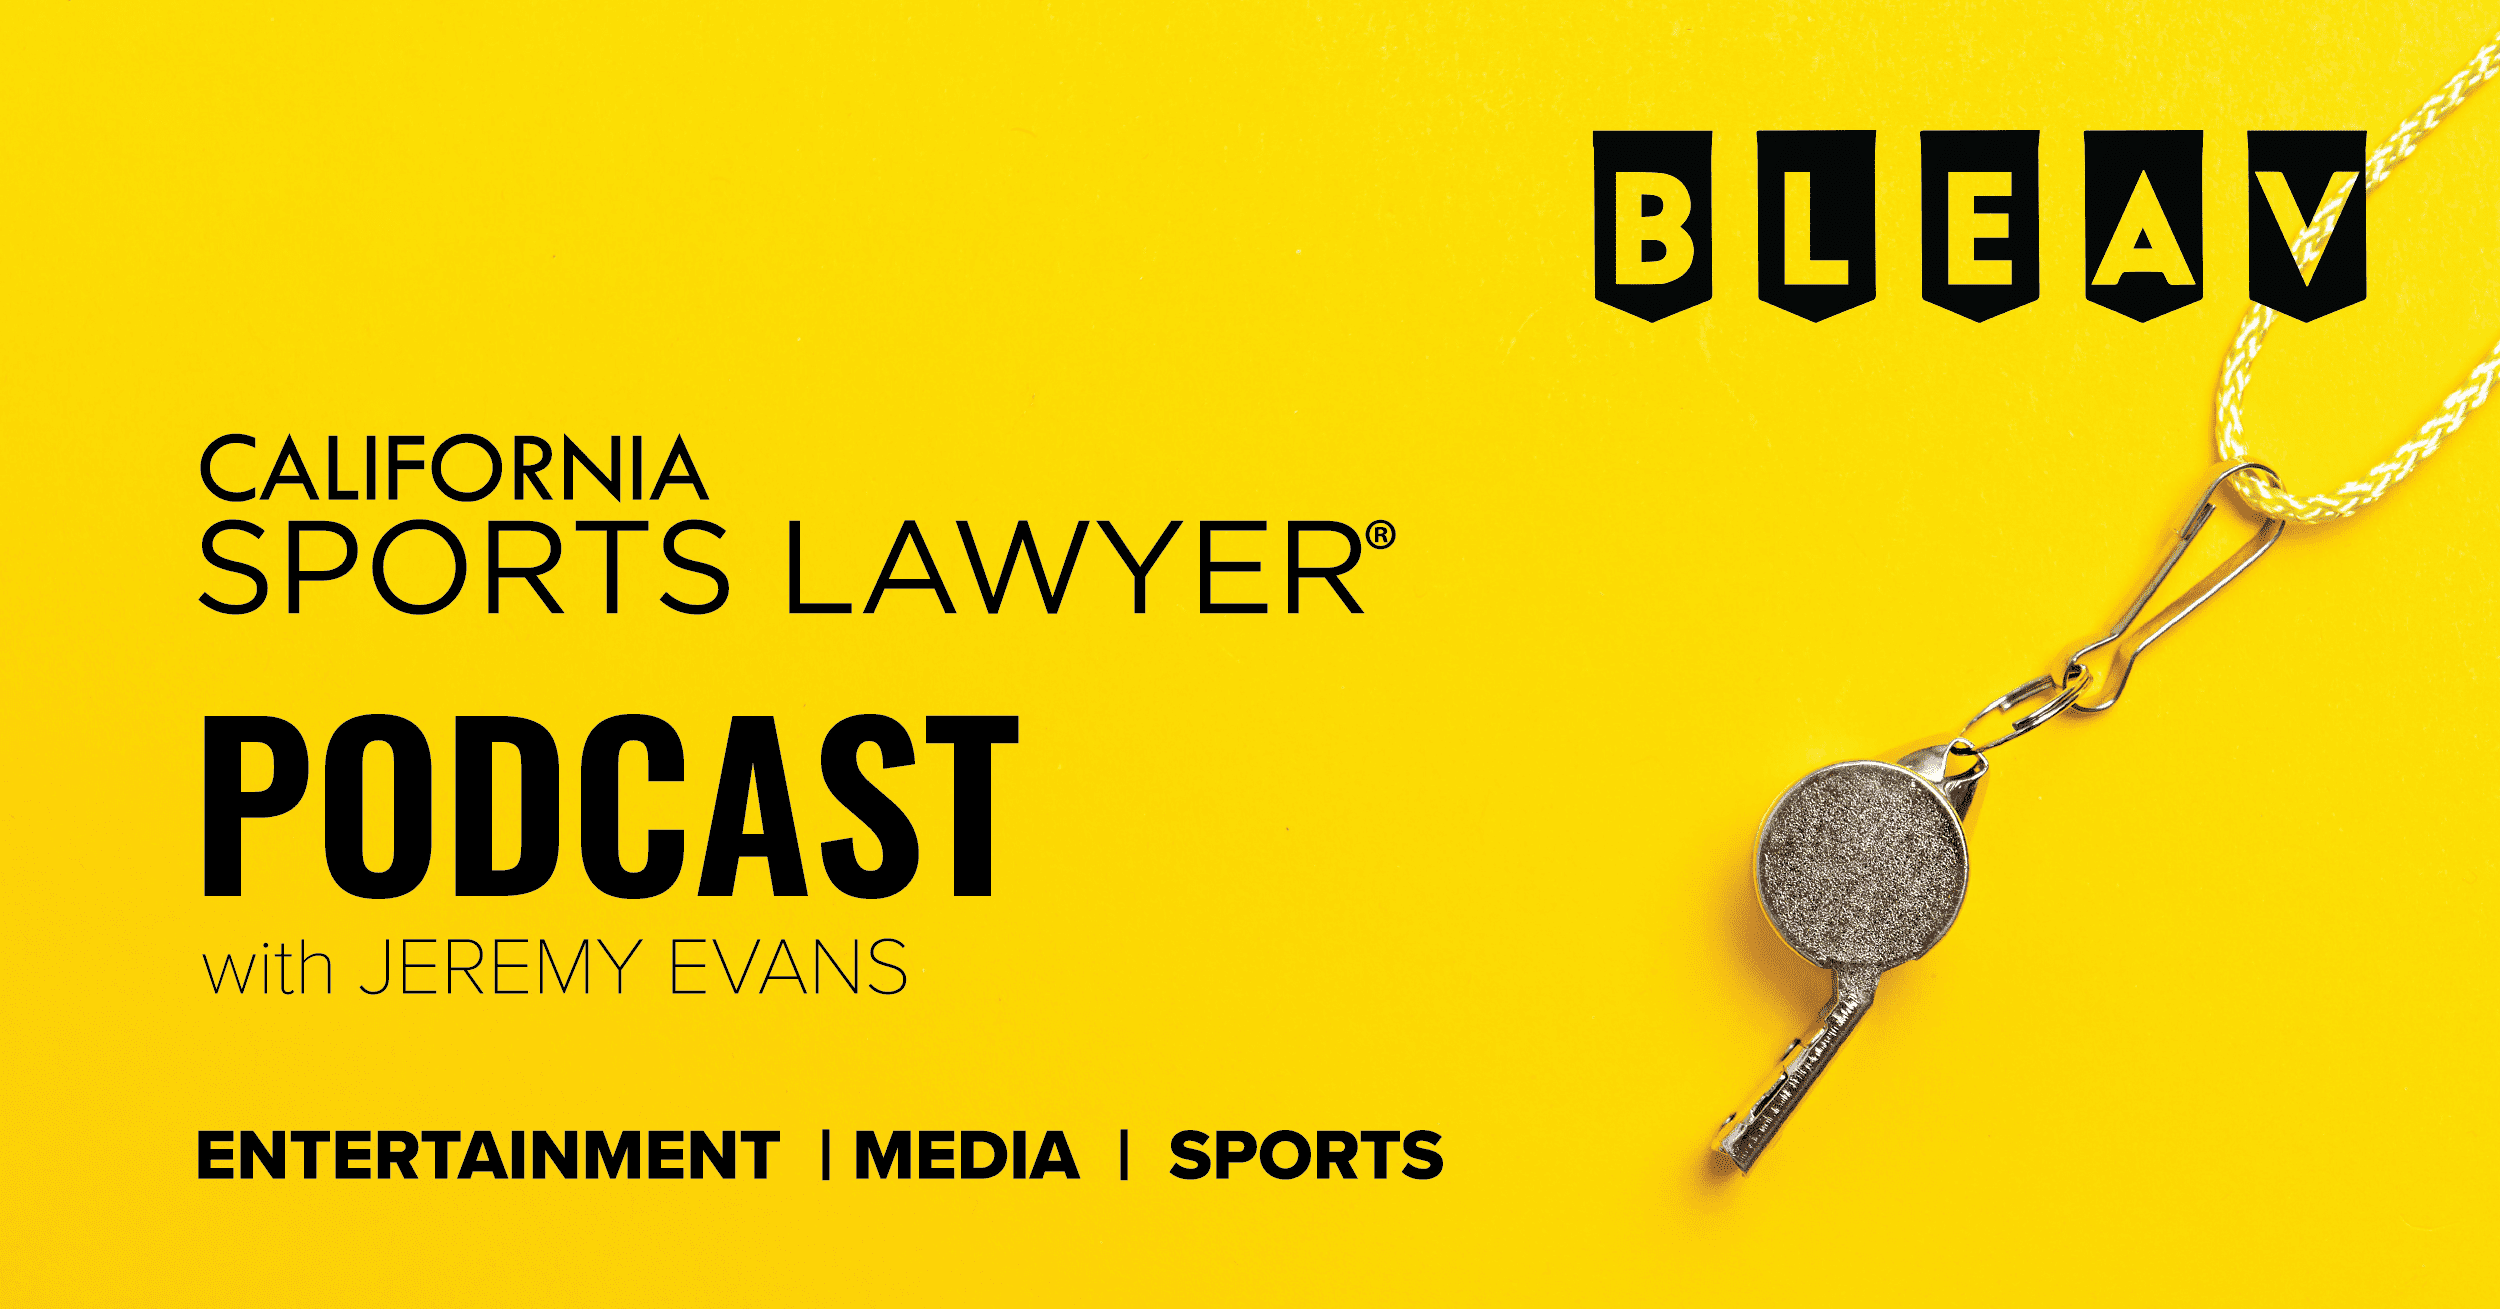 California Sports Lawyer® Podcast with Jeremy Evans: New Era of College Football and Basketball